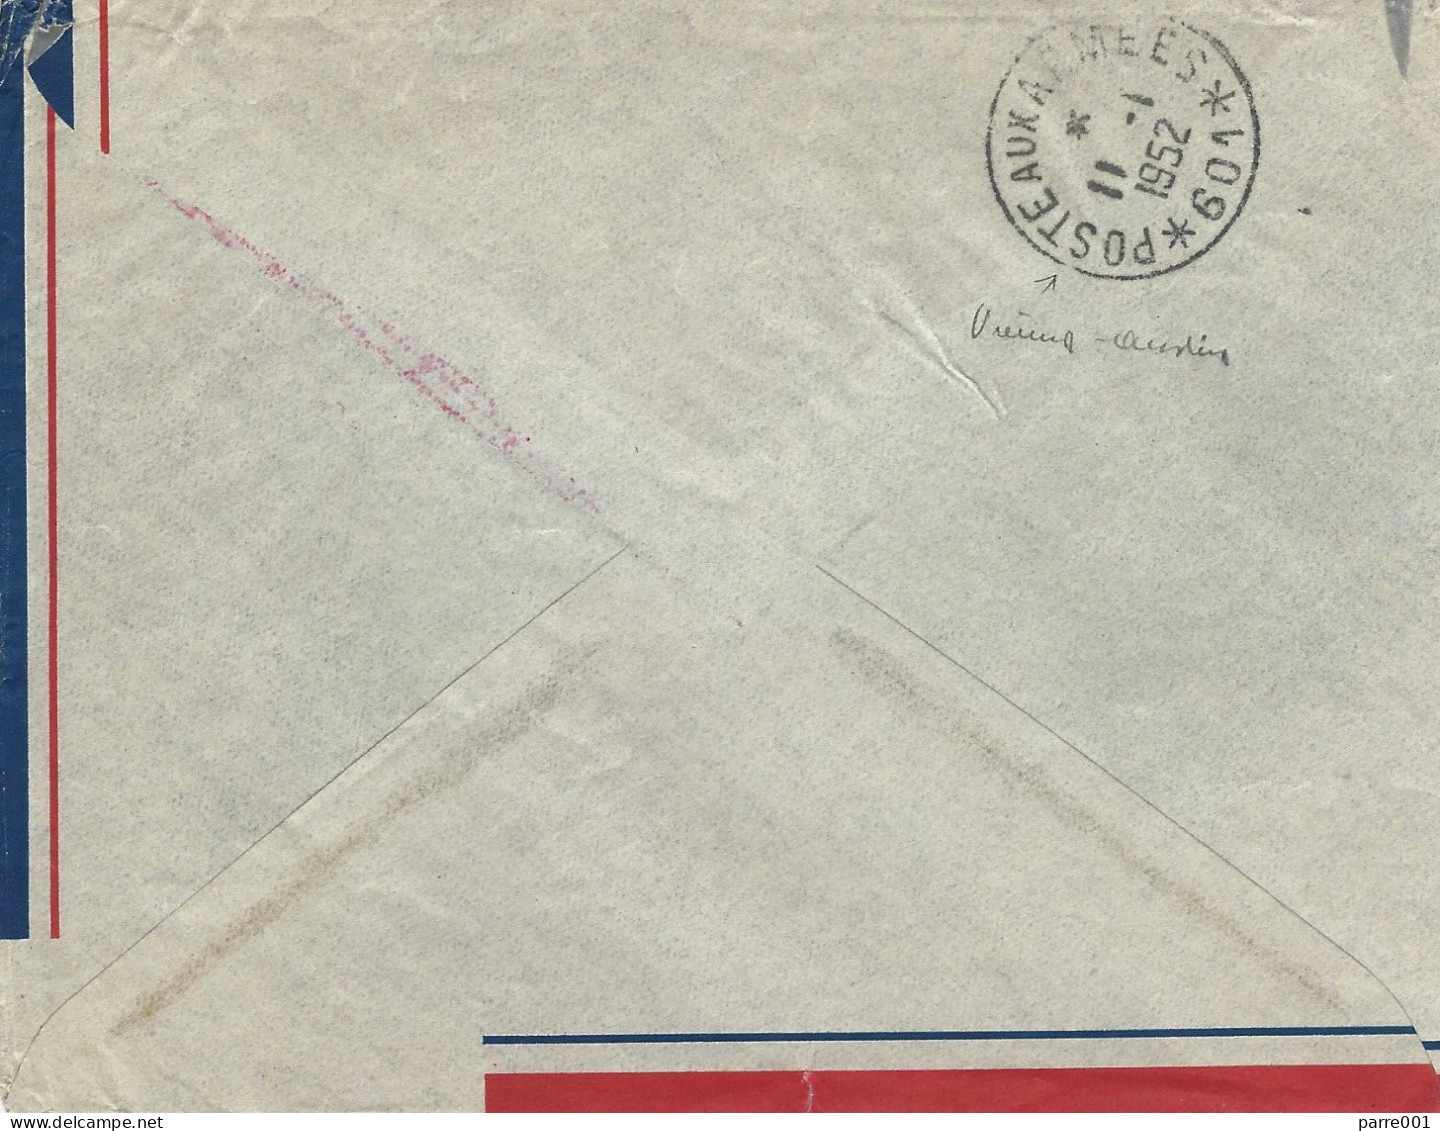 France 1952 Poste Aux Armees  T.O.E Indochine To BMP 601 Vienna Austria French Occupation Forces T.O.A. Official Cover - Guerra D'Indocina/Vietnam